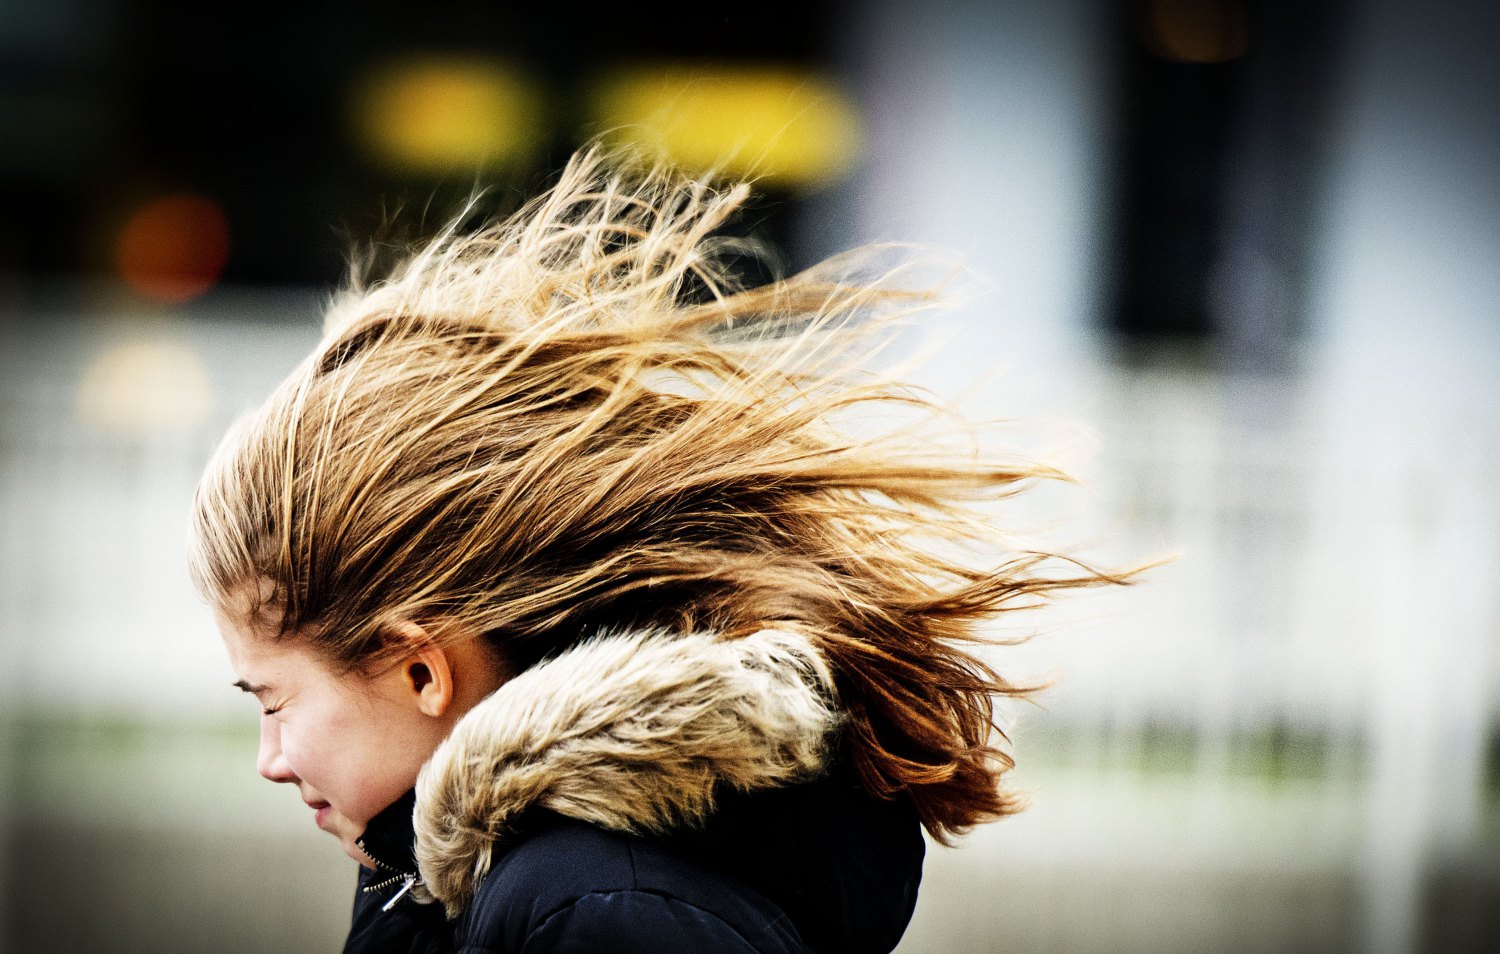 A girl struggles against the wind in Rotterdam on December 5, 2013.  Xaver, a fierce storm, battered northern Europe Thursday, leaving three people dead or missing, causing mass transport disruption and threatening the biggest tidal surge in decades. Winds of up to 142 miles (228 kilometres) per hour battered northern Britain while authorities evacuated residents and boosted flood defences in low-lying areas across the region. AFP PHOTO / ANP – ROBIN UTRECHT netherlands out        (Photo credit should read ROBIN UTRECHT/AFP/Getty Images)